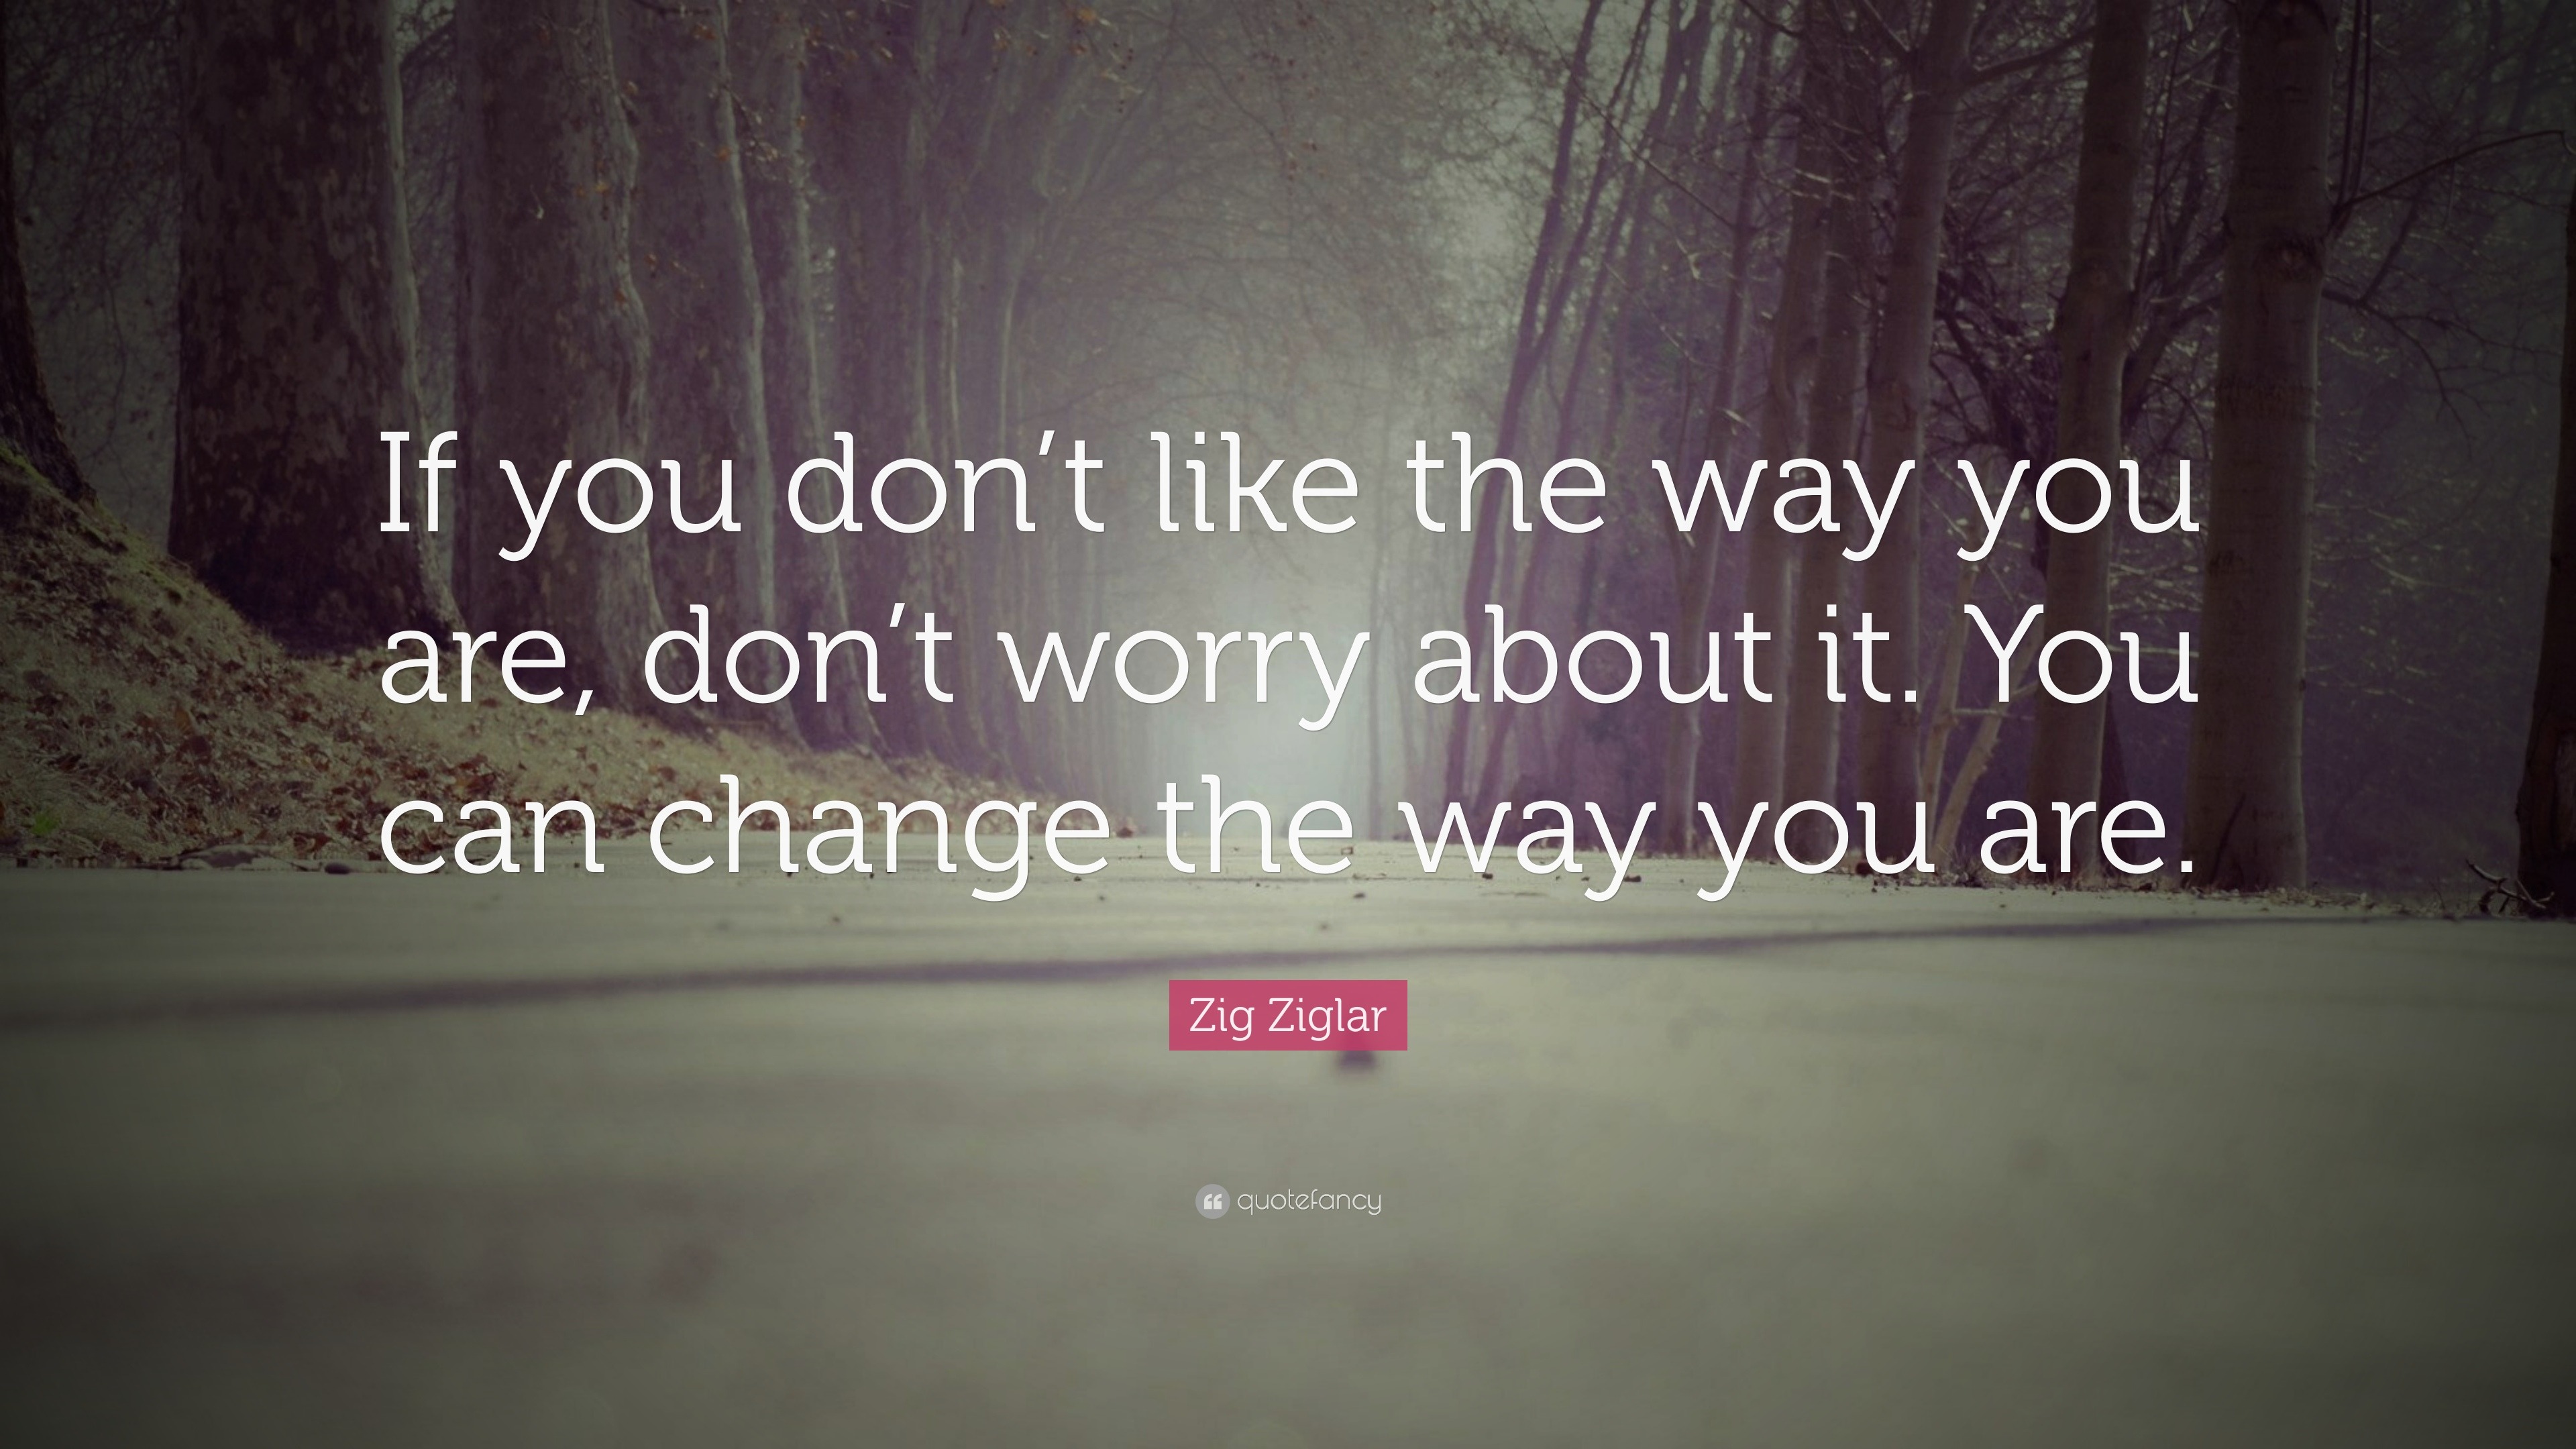 Zig Ziglar Quote: "If you don’t like the way you are, don’t 